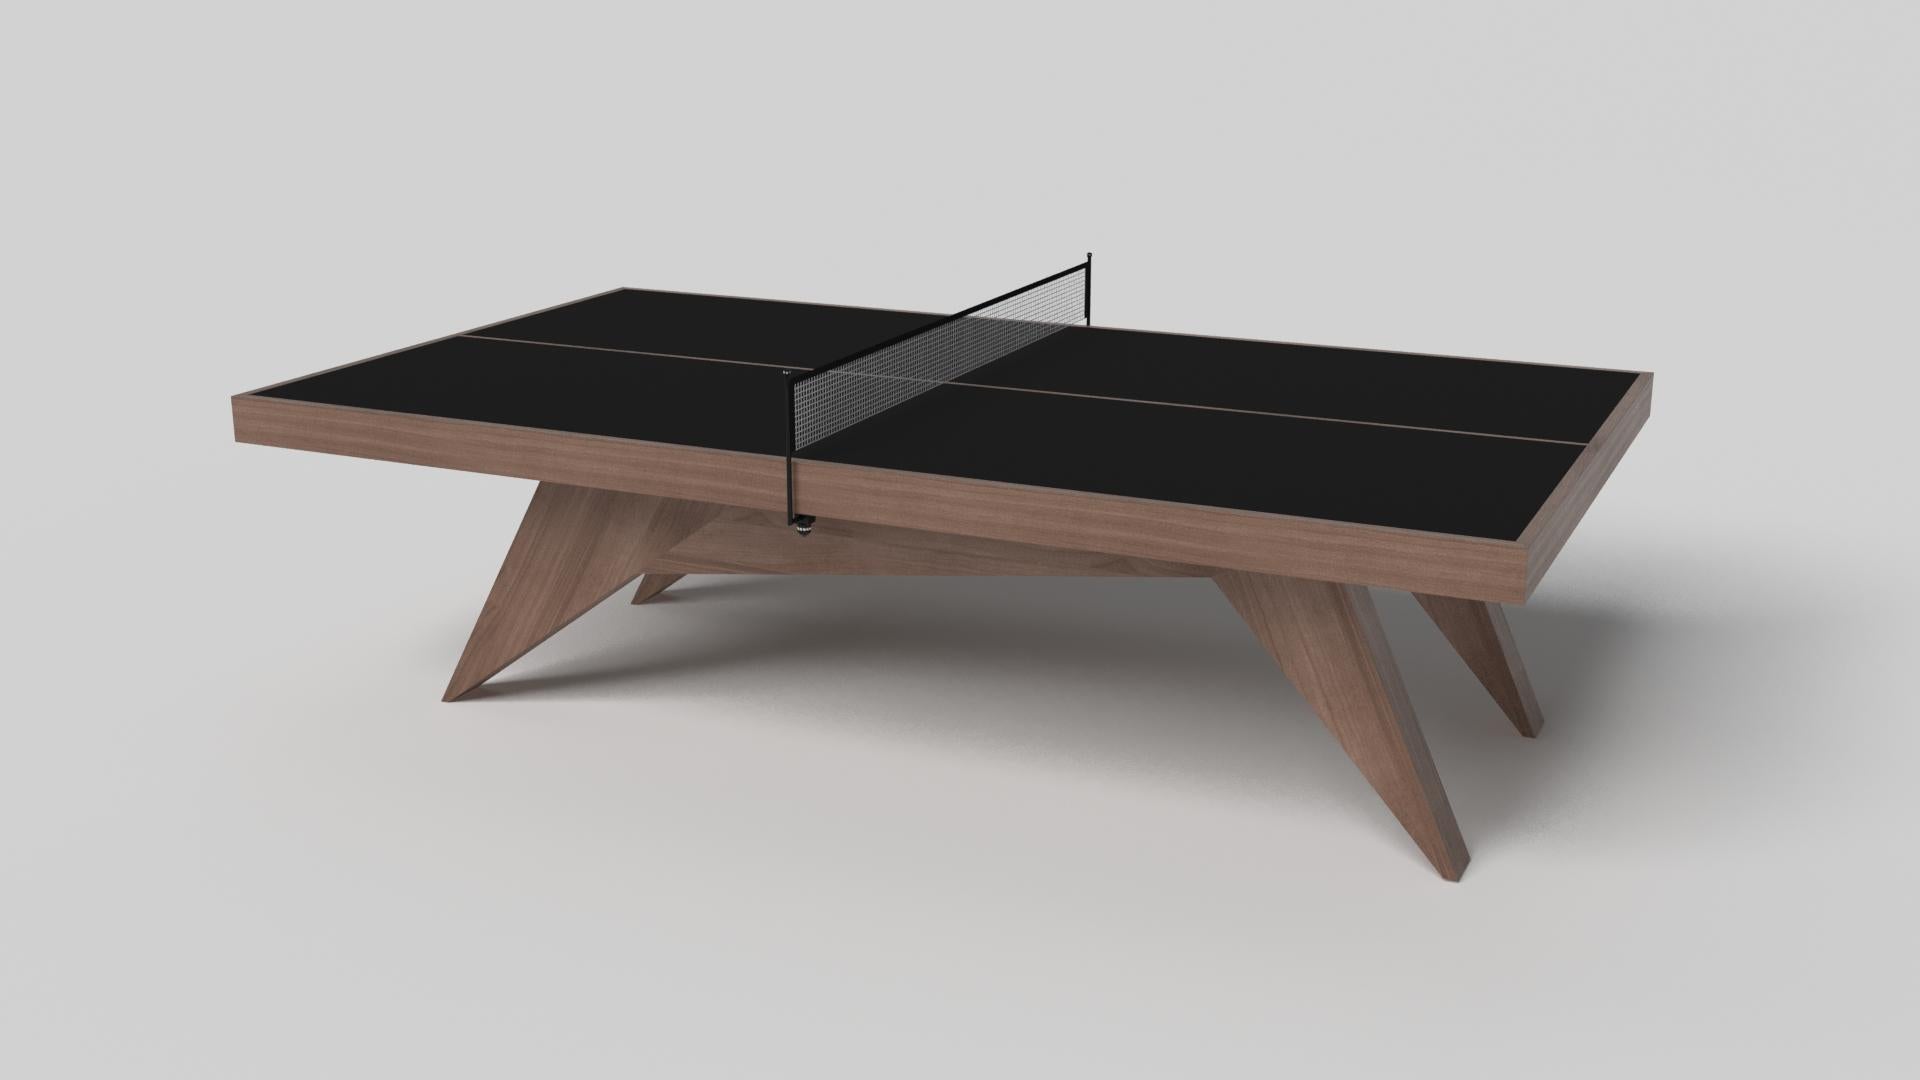 Simple yet sophisticated, the Mantis table tennis table in black with brushed aluminum puts a fresh, modern spin on a classic four-legged design. Sharp angles and tapered legs provide sleek stability, while contrast metal trim adds an air of